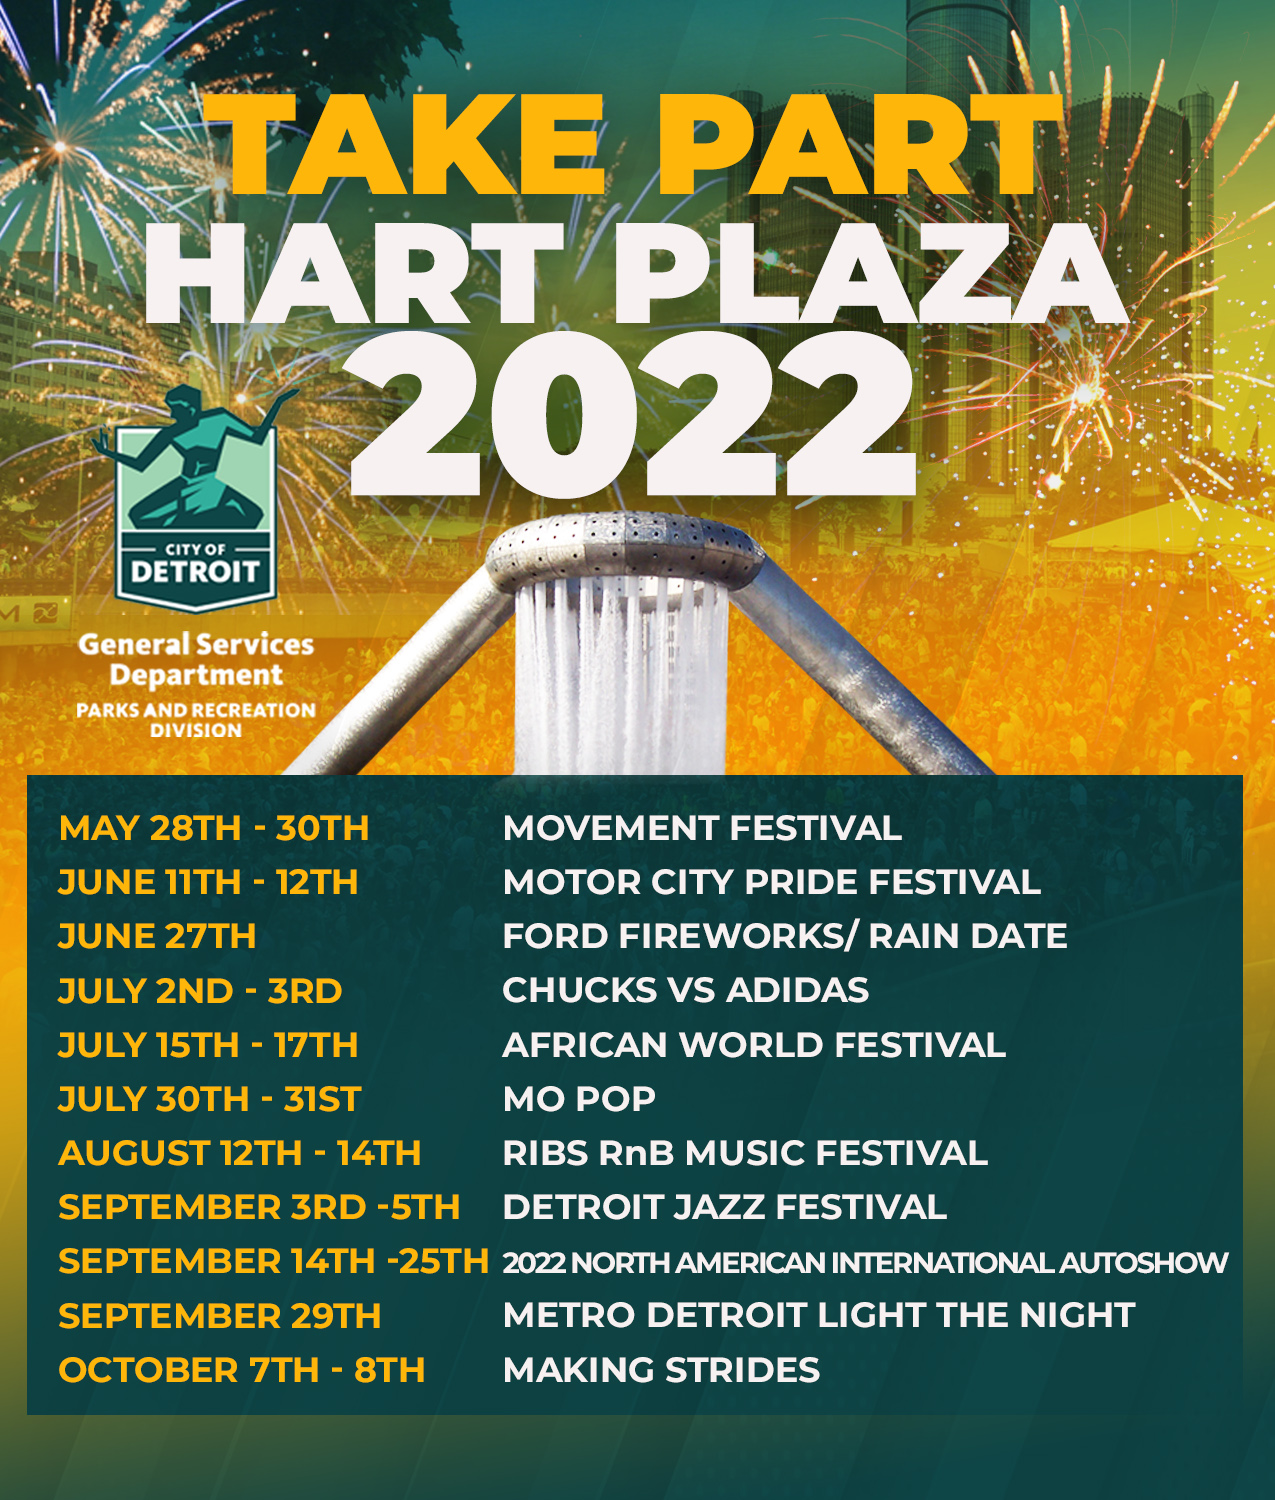 Take Part in Hart Plaza Events